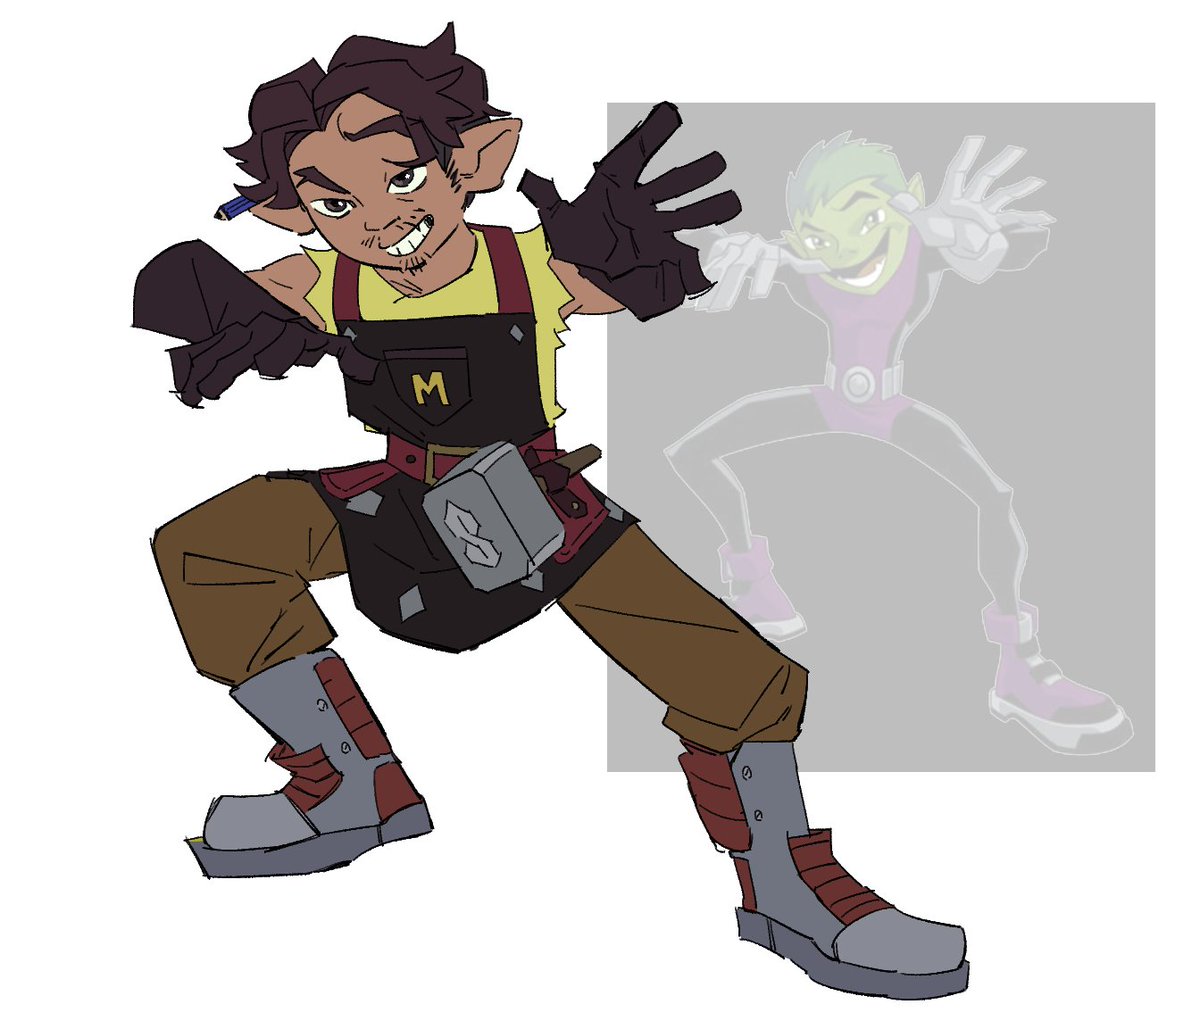 Someone said he had a beast boy head and I can't get it out of my mind #mattholomule #TheOwlHouse